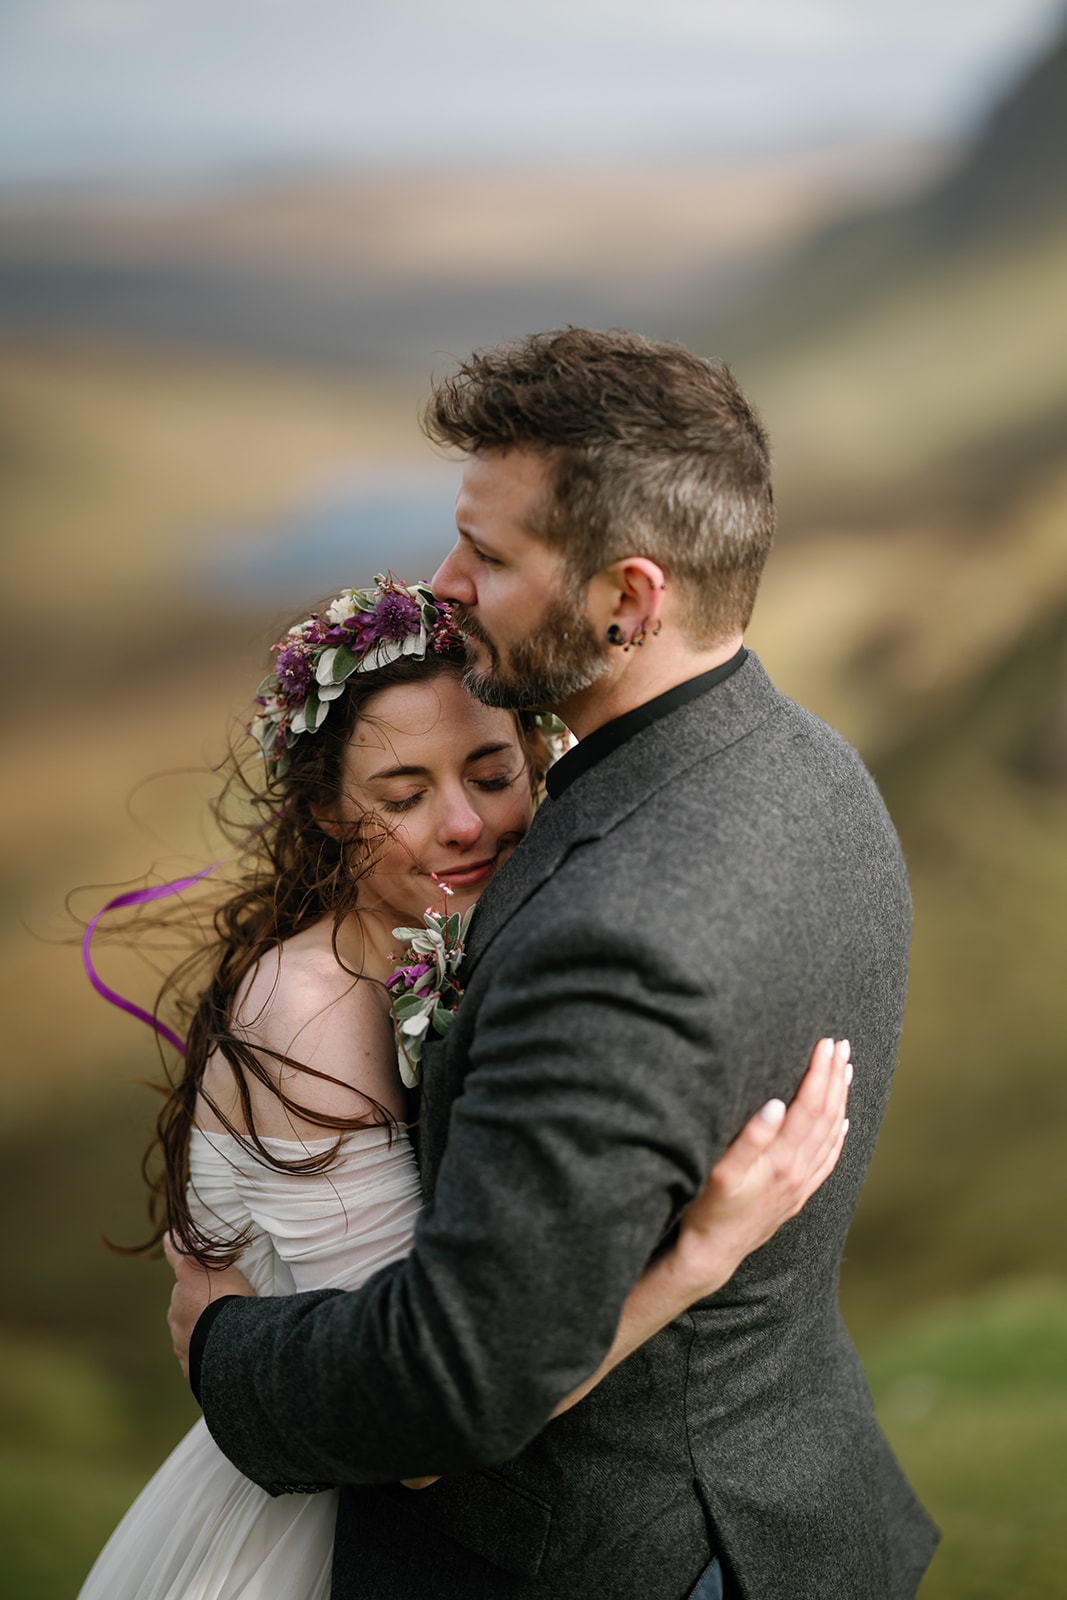 Becca and Nick, surrounded by the ancient beauty of Quiraing, find solace in each others arms during their elopement day